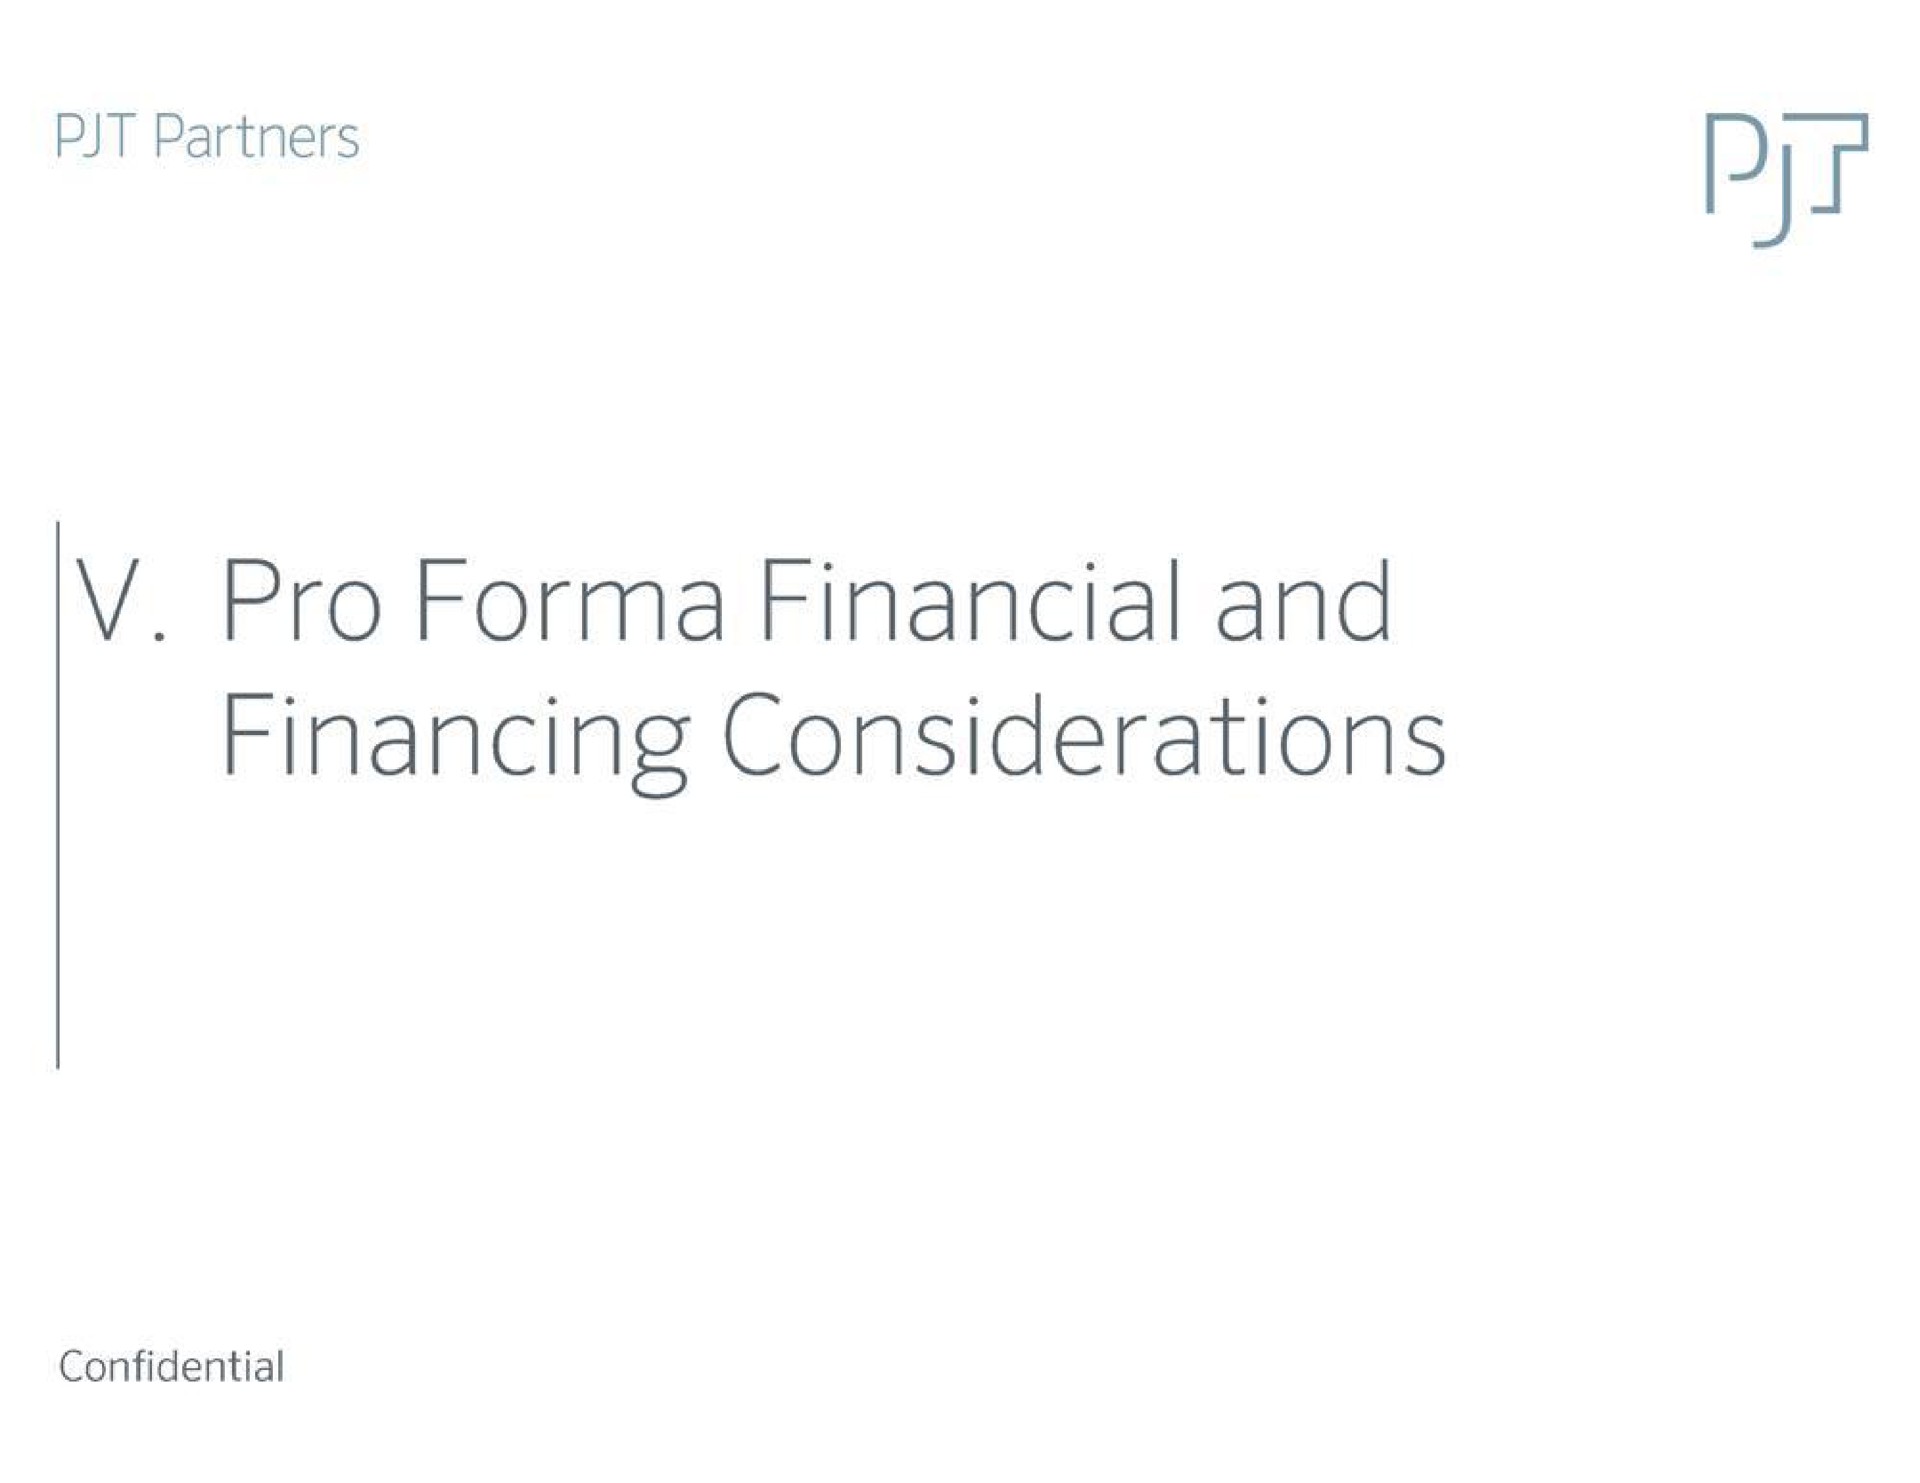 partners pro financial and financing considerations | PJT Partners